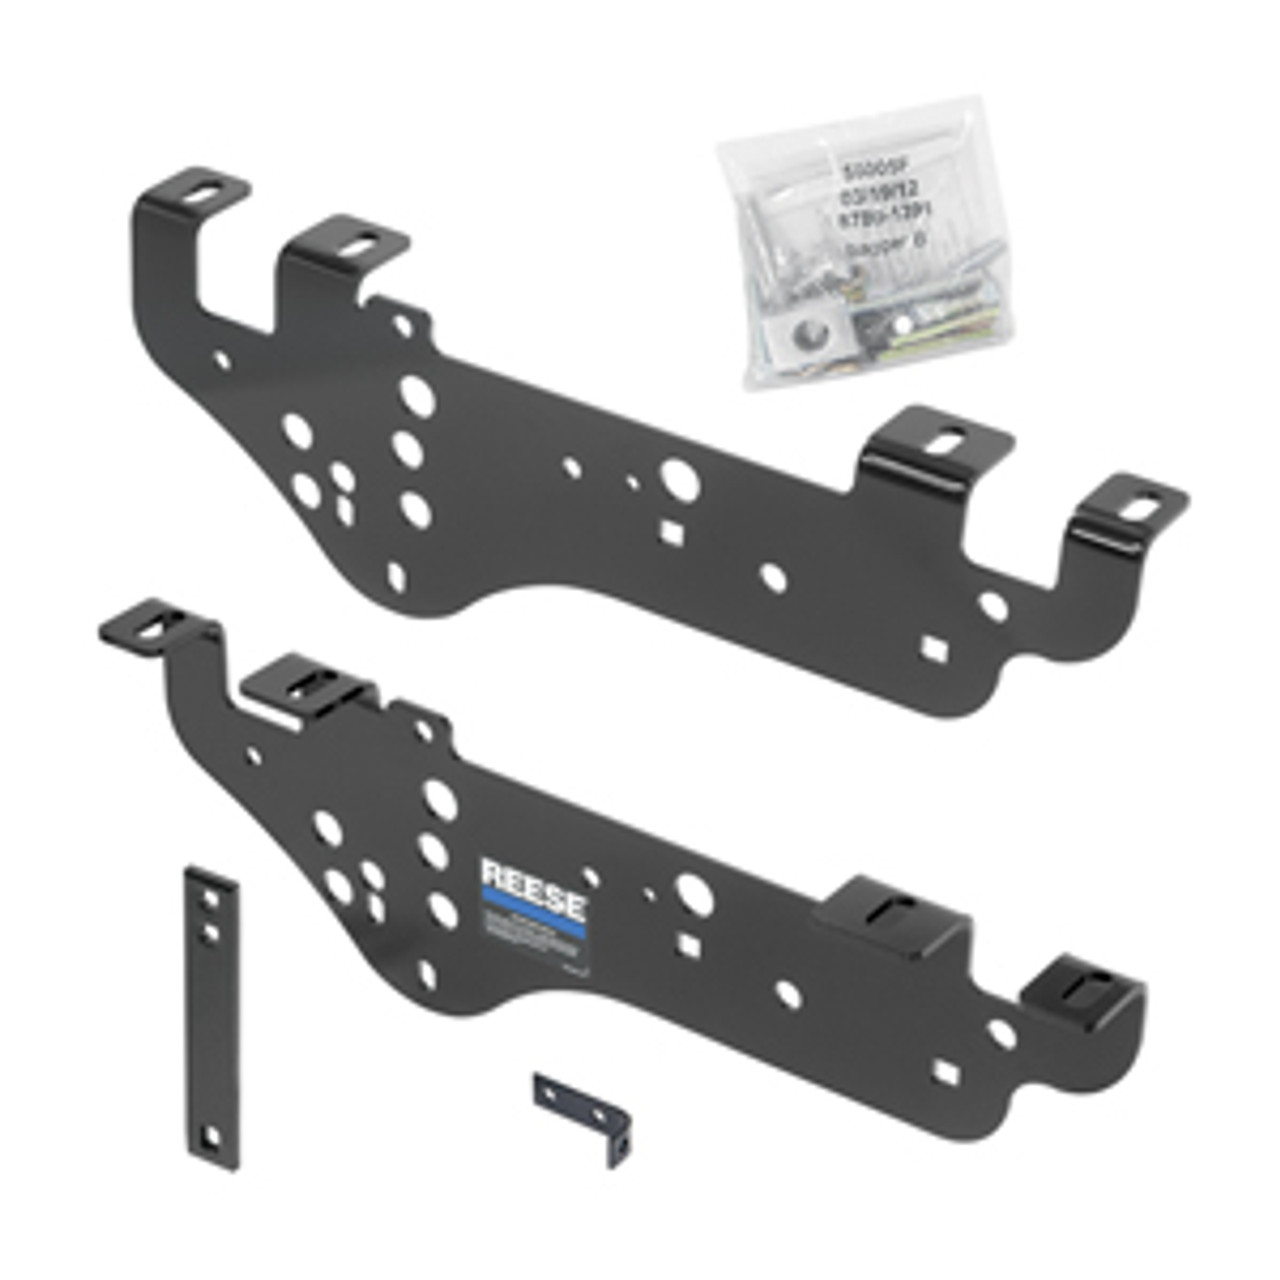 56005 --- Fifth Wheel Trailer Hitch Outboard Bracket Kit for F250/F350/F450 Pickups